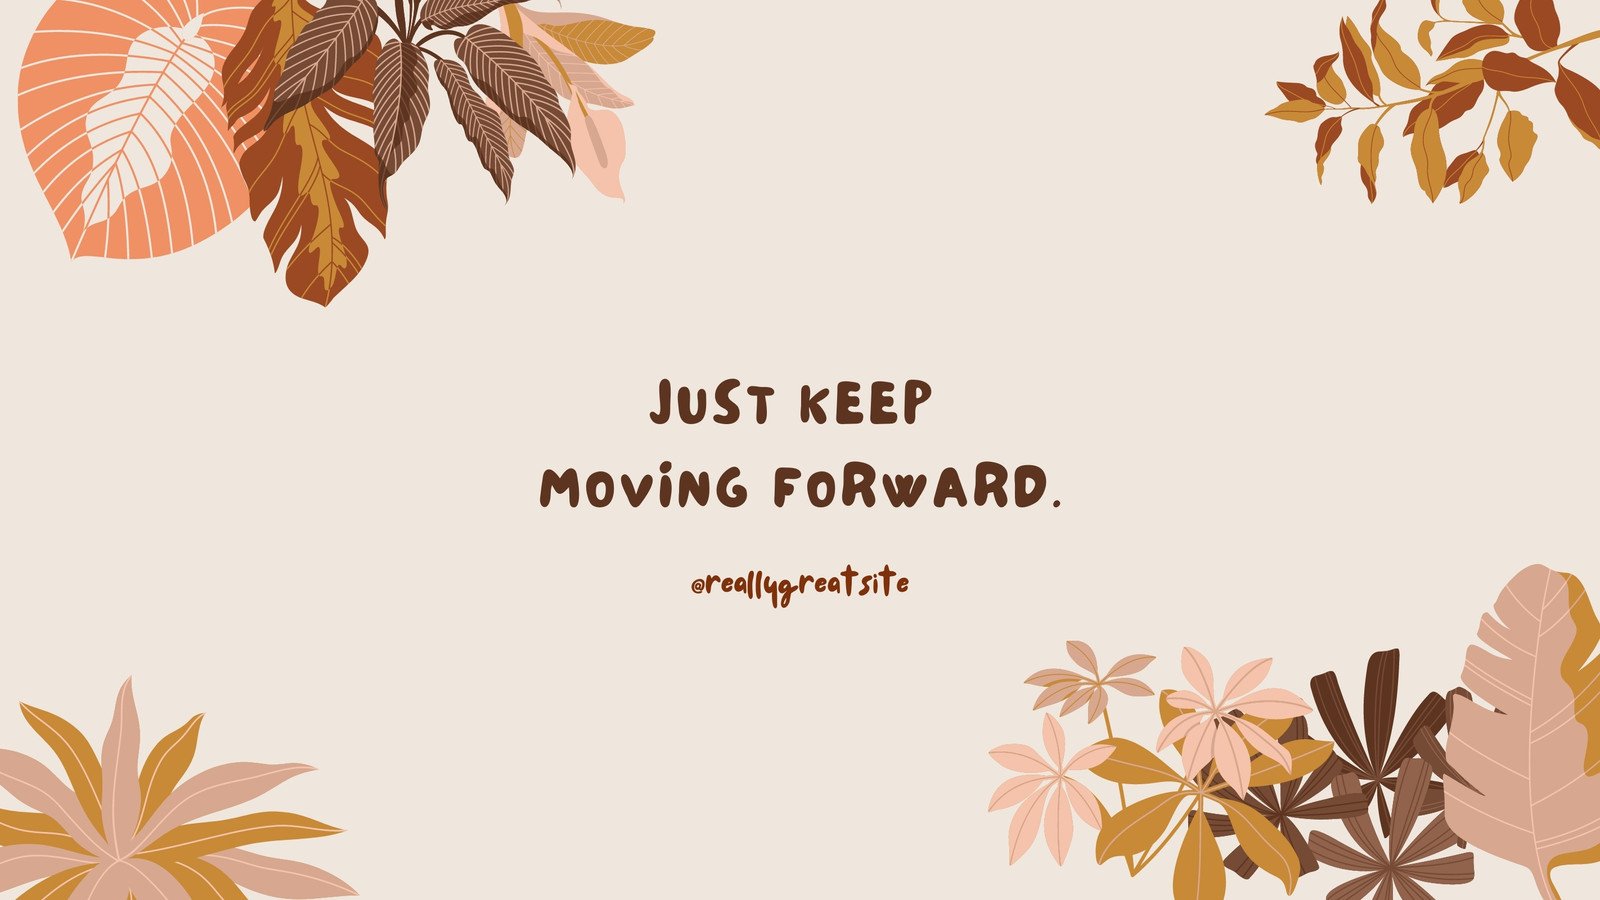 Download Keep Moving Forward Motivational Iphone Wallpaper | Wallpapers.com